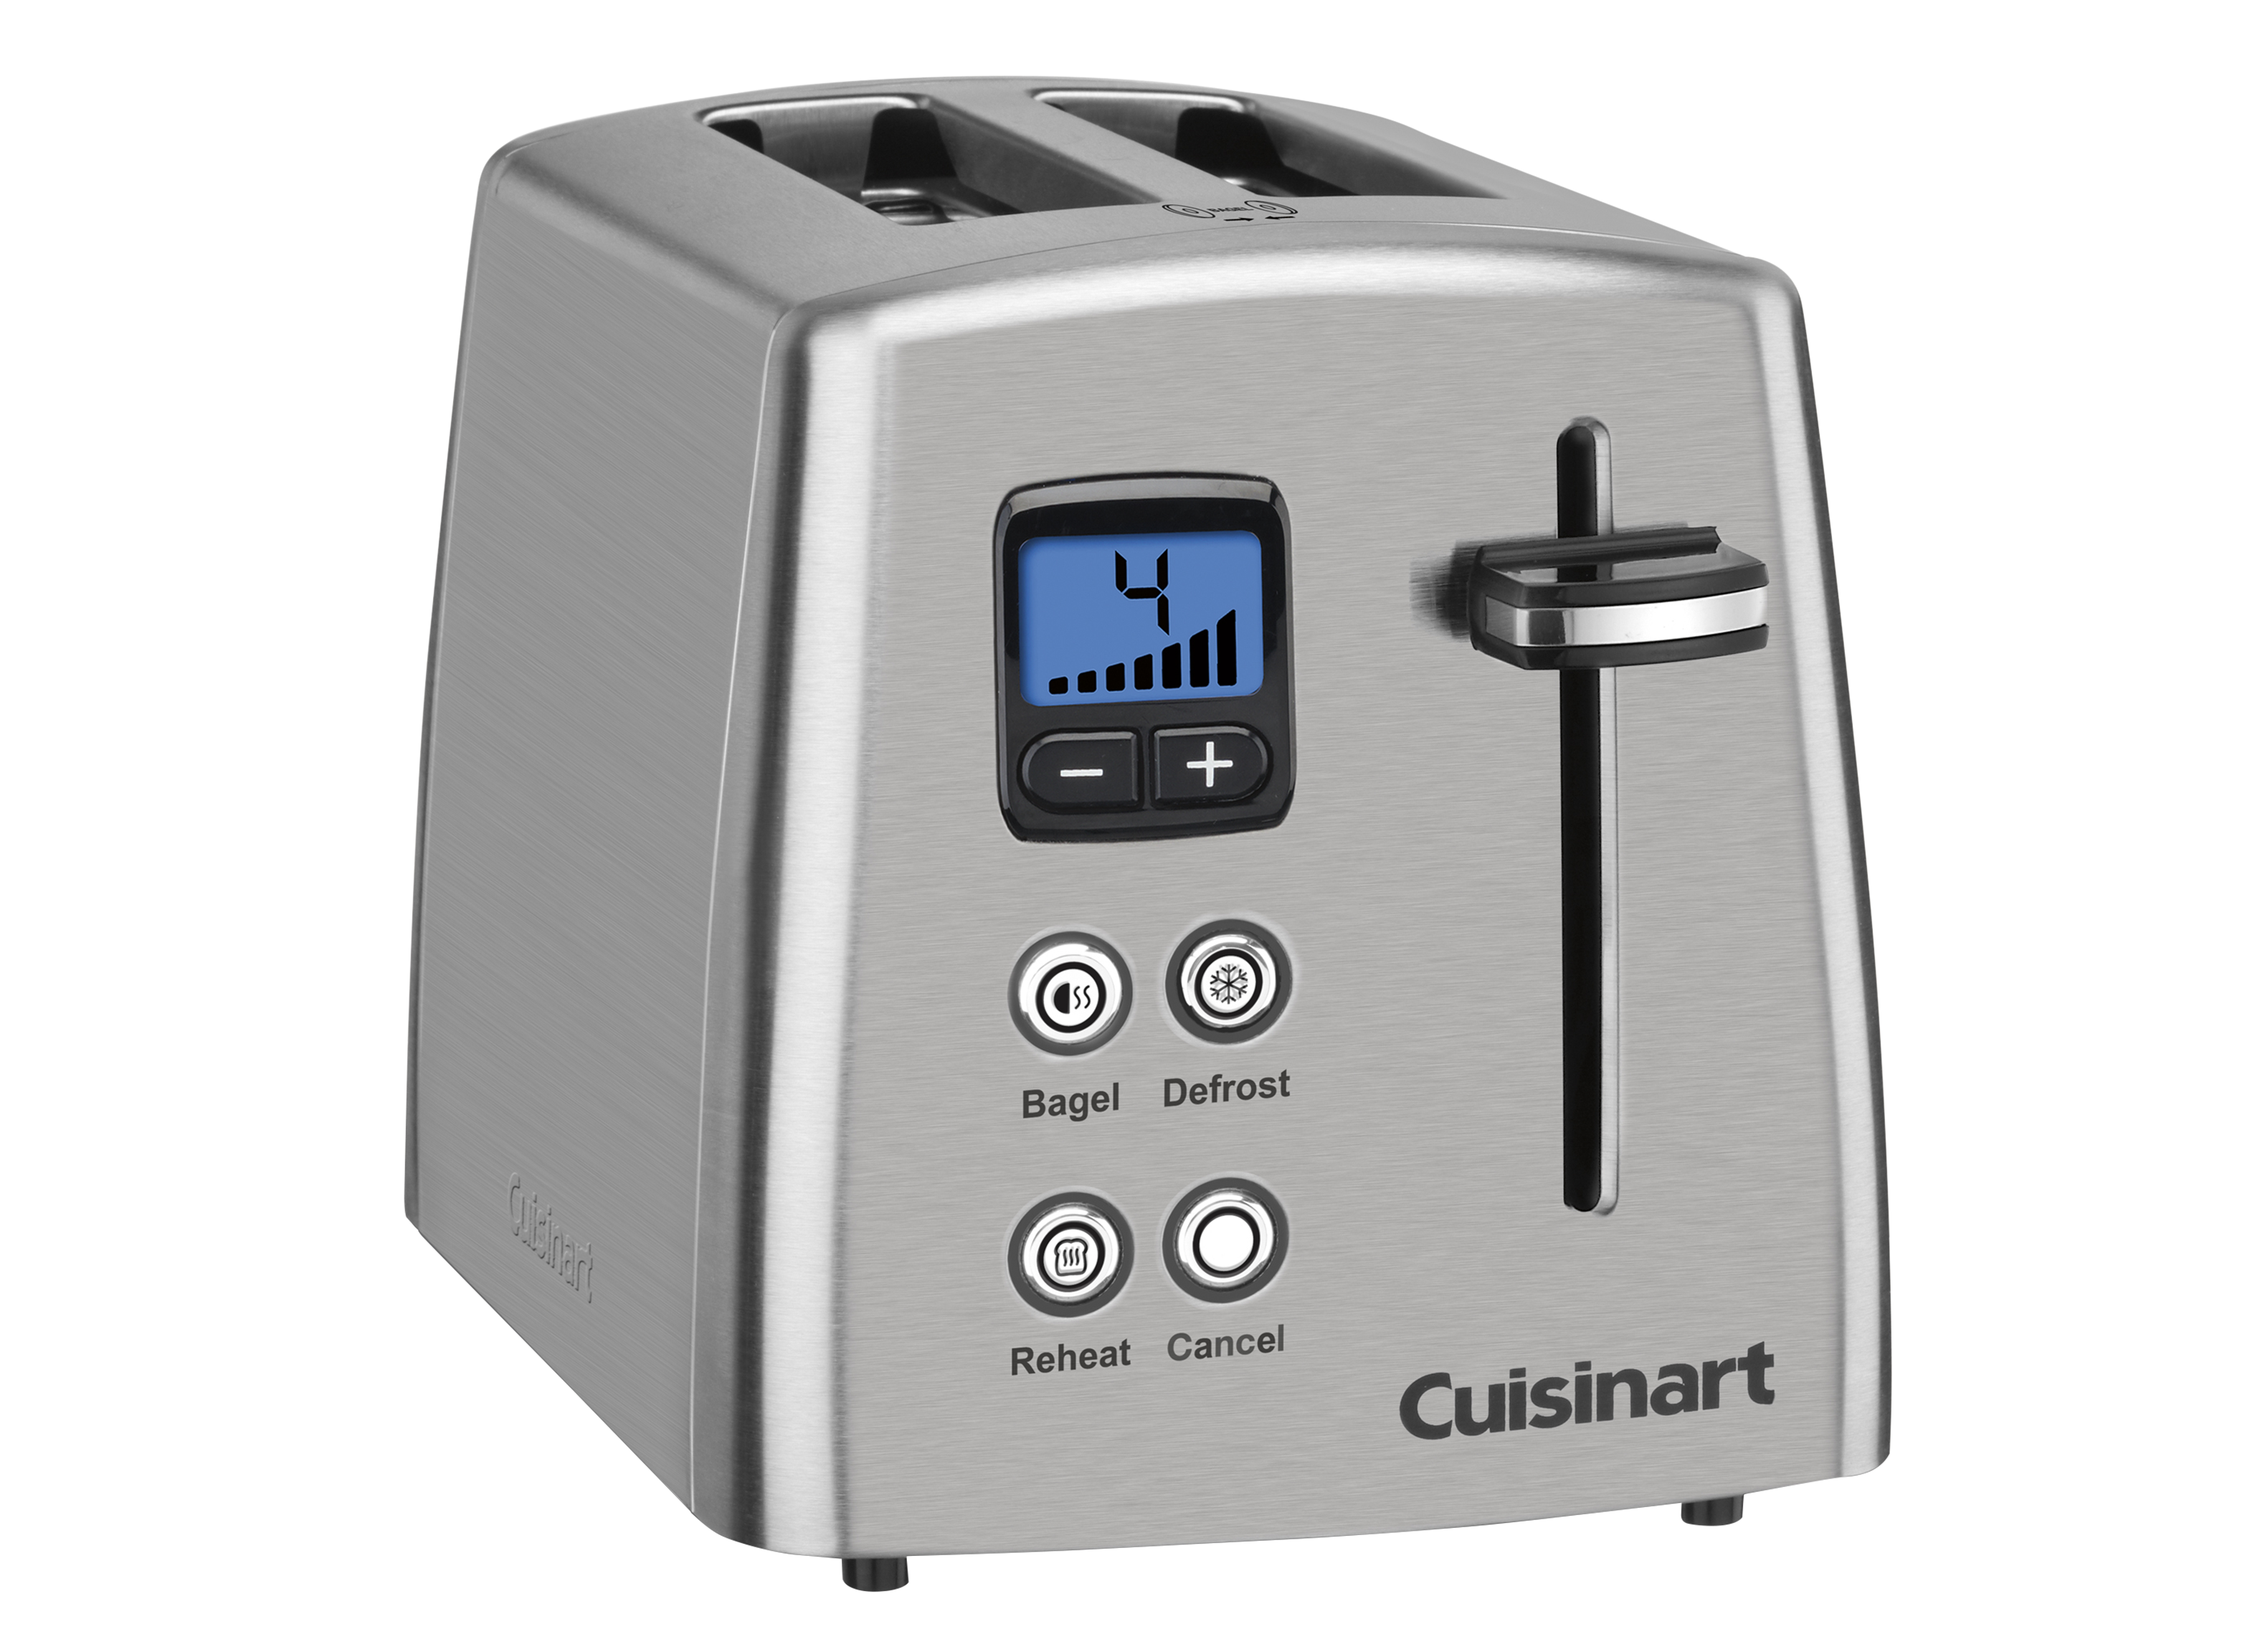 https://crdms.images.consumerreports.org/prod/products/cr/models/394047-toasters-cuisinart-countdownmetalcpt415.png